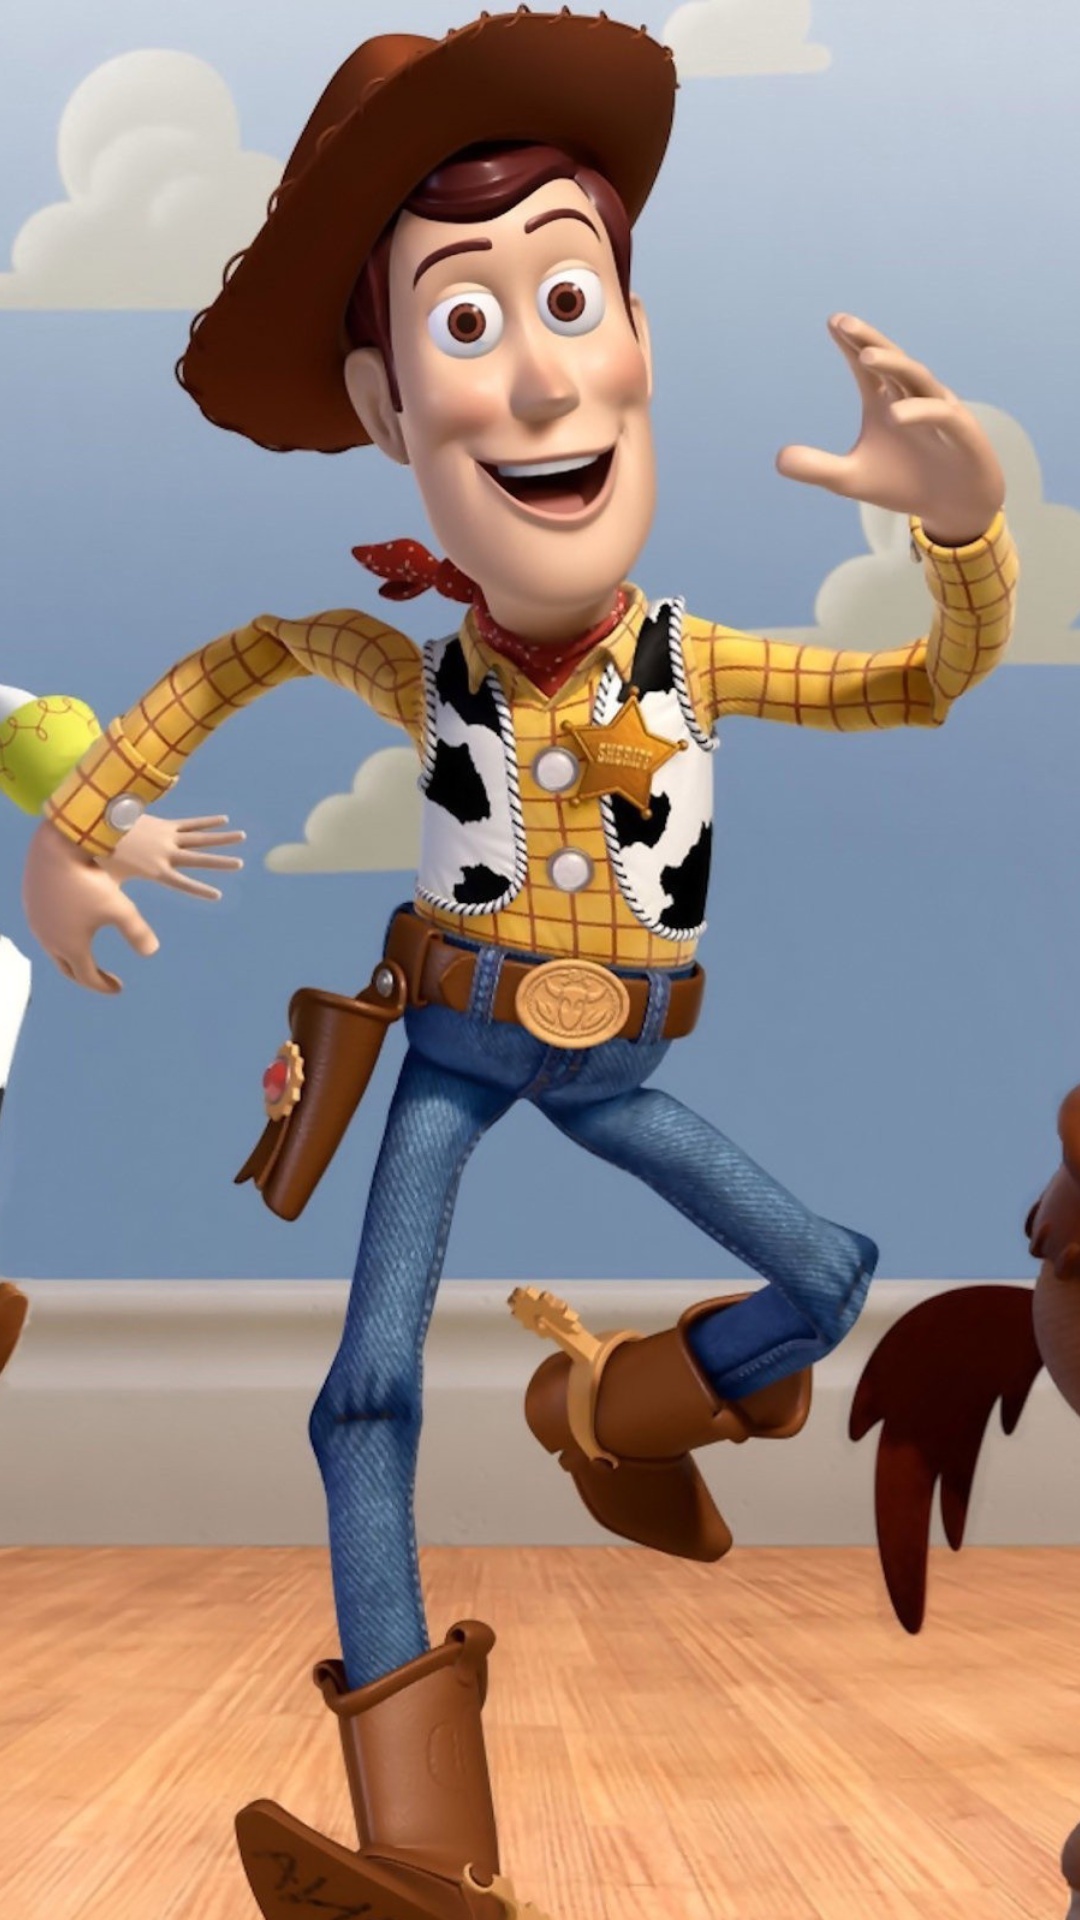 Das Woody in Toy Story 3 Wallpaper 1080x1920